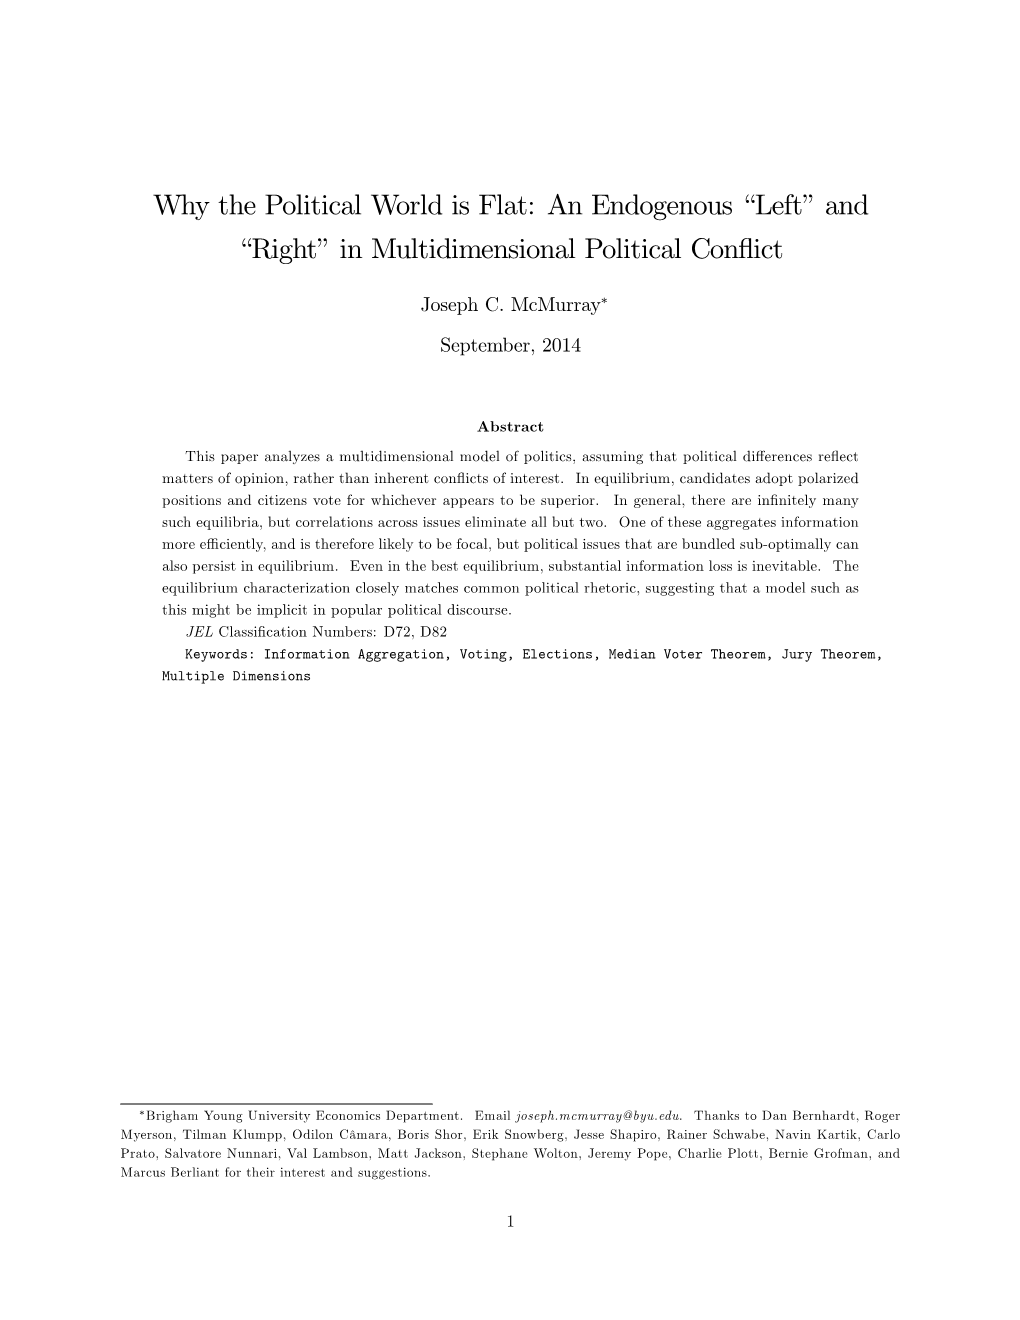 An Endogenous Pleftqand Prightqin Multidimensional Political Conflict